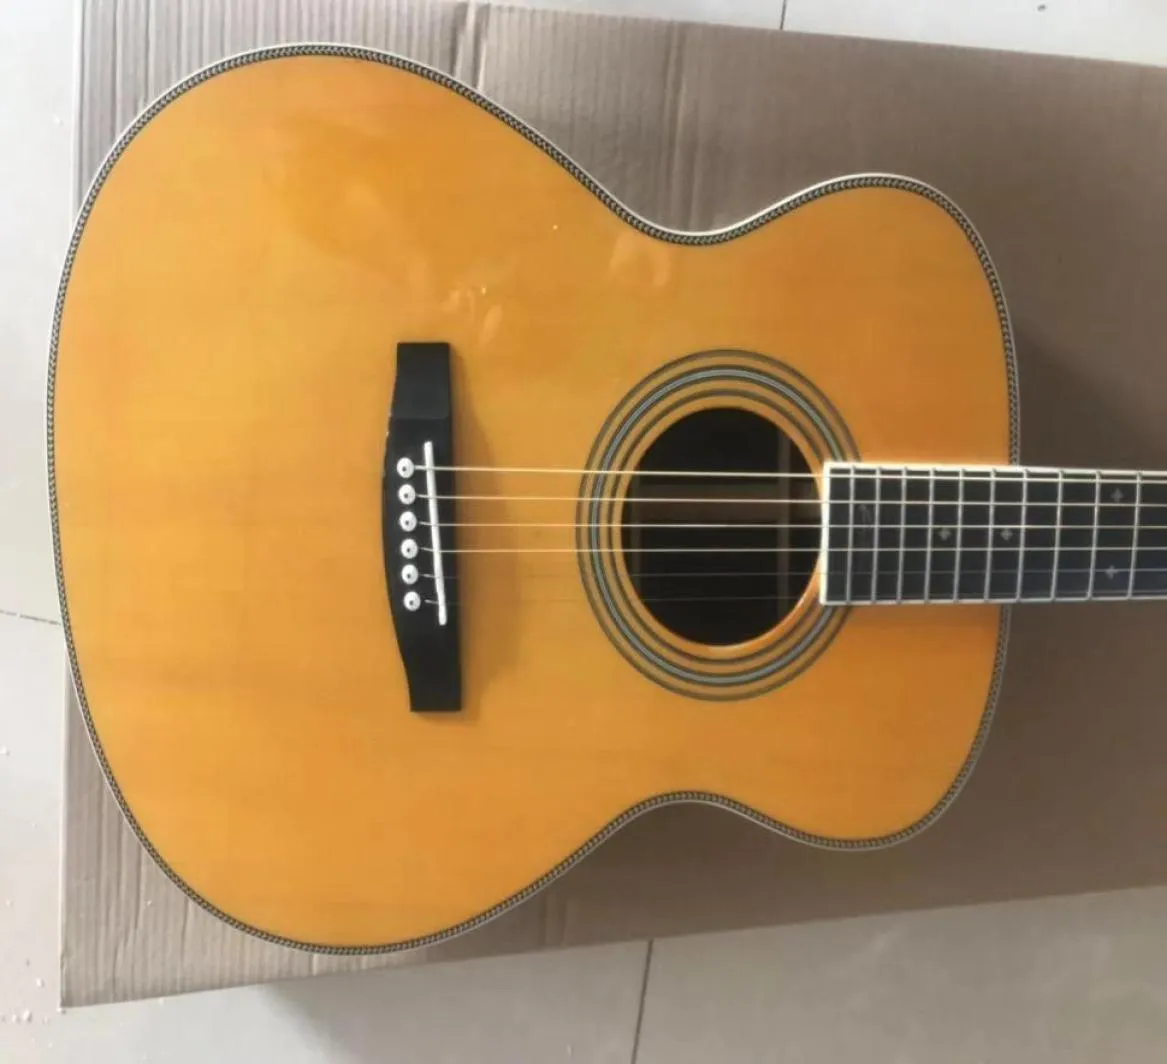 Solid Spruce Top 41 Inches Natural Vintage Acoustic Electric Guitar John Mayer Signagure Fingerboard Inlay Grover Tuners Bone N4190679